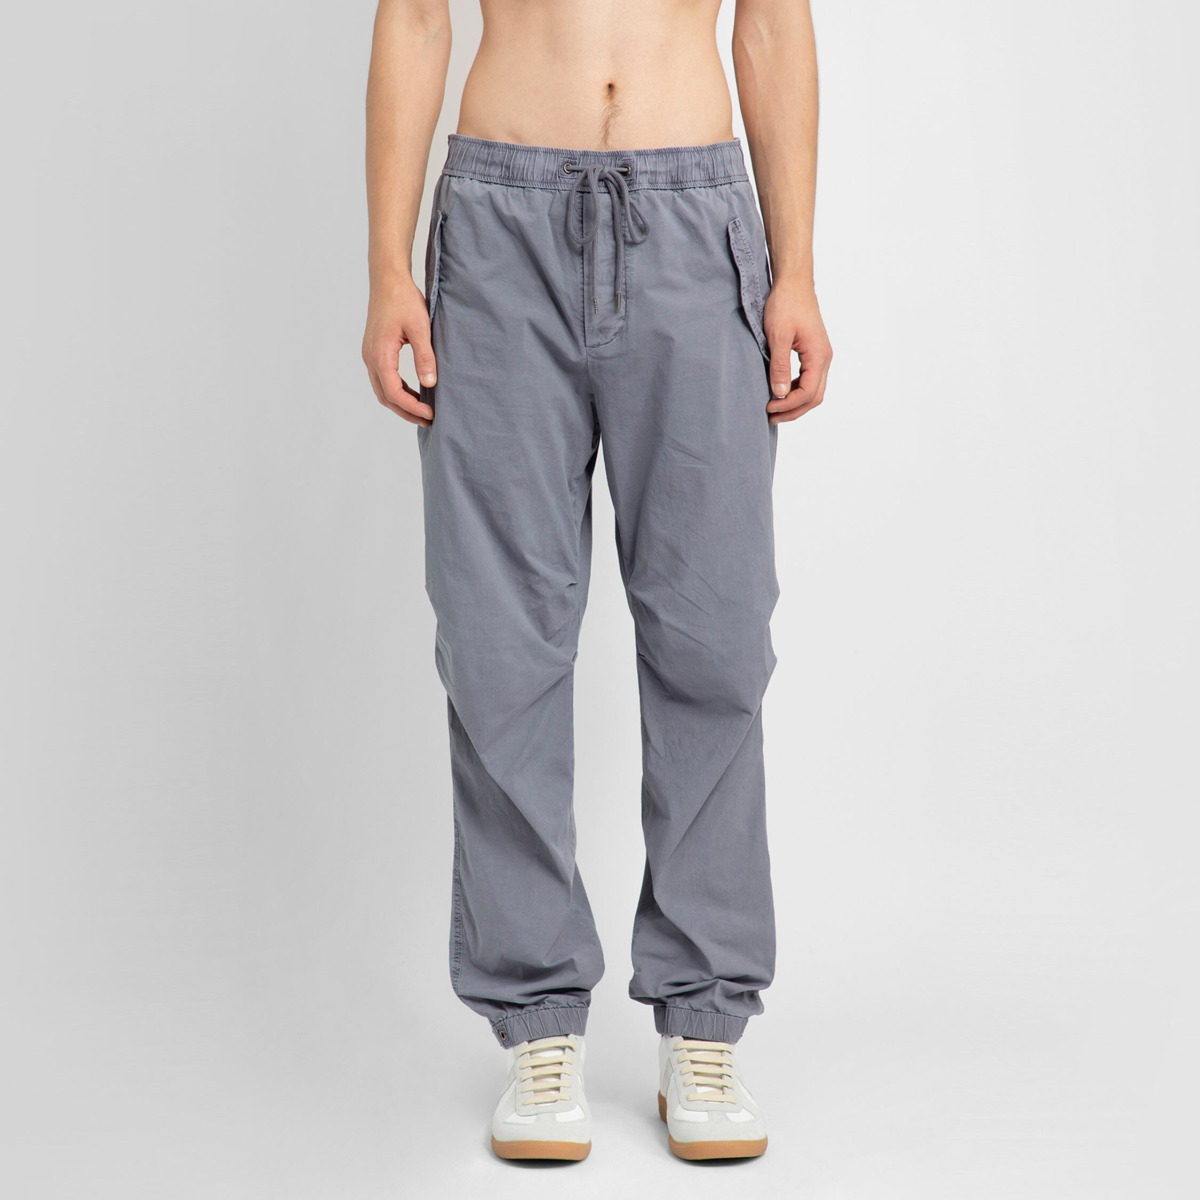 James Perse Trousers Grey for Men from Antonioli GOOFASH